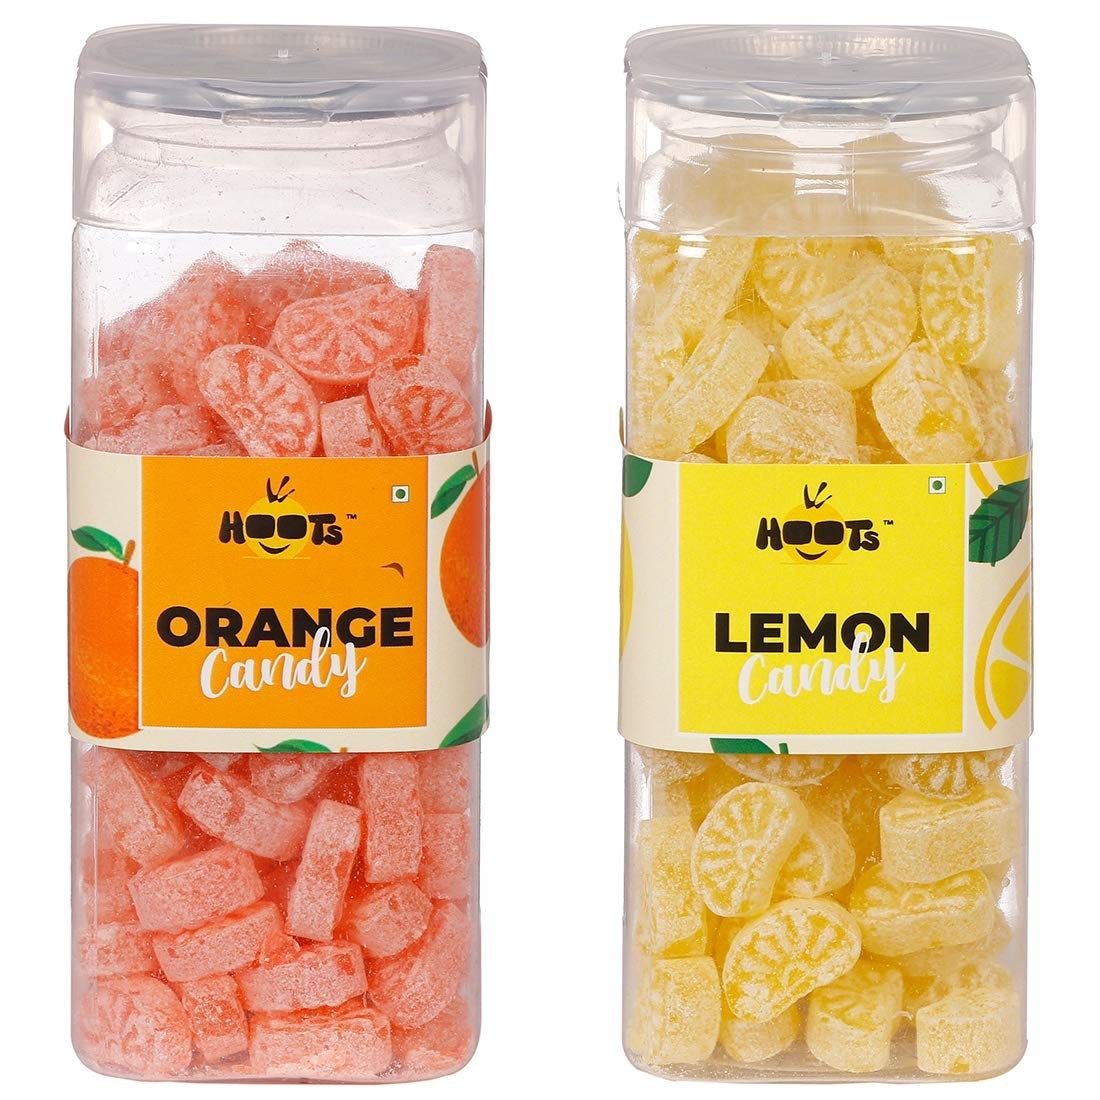 A set of two orange and lemon candies from Hoots